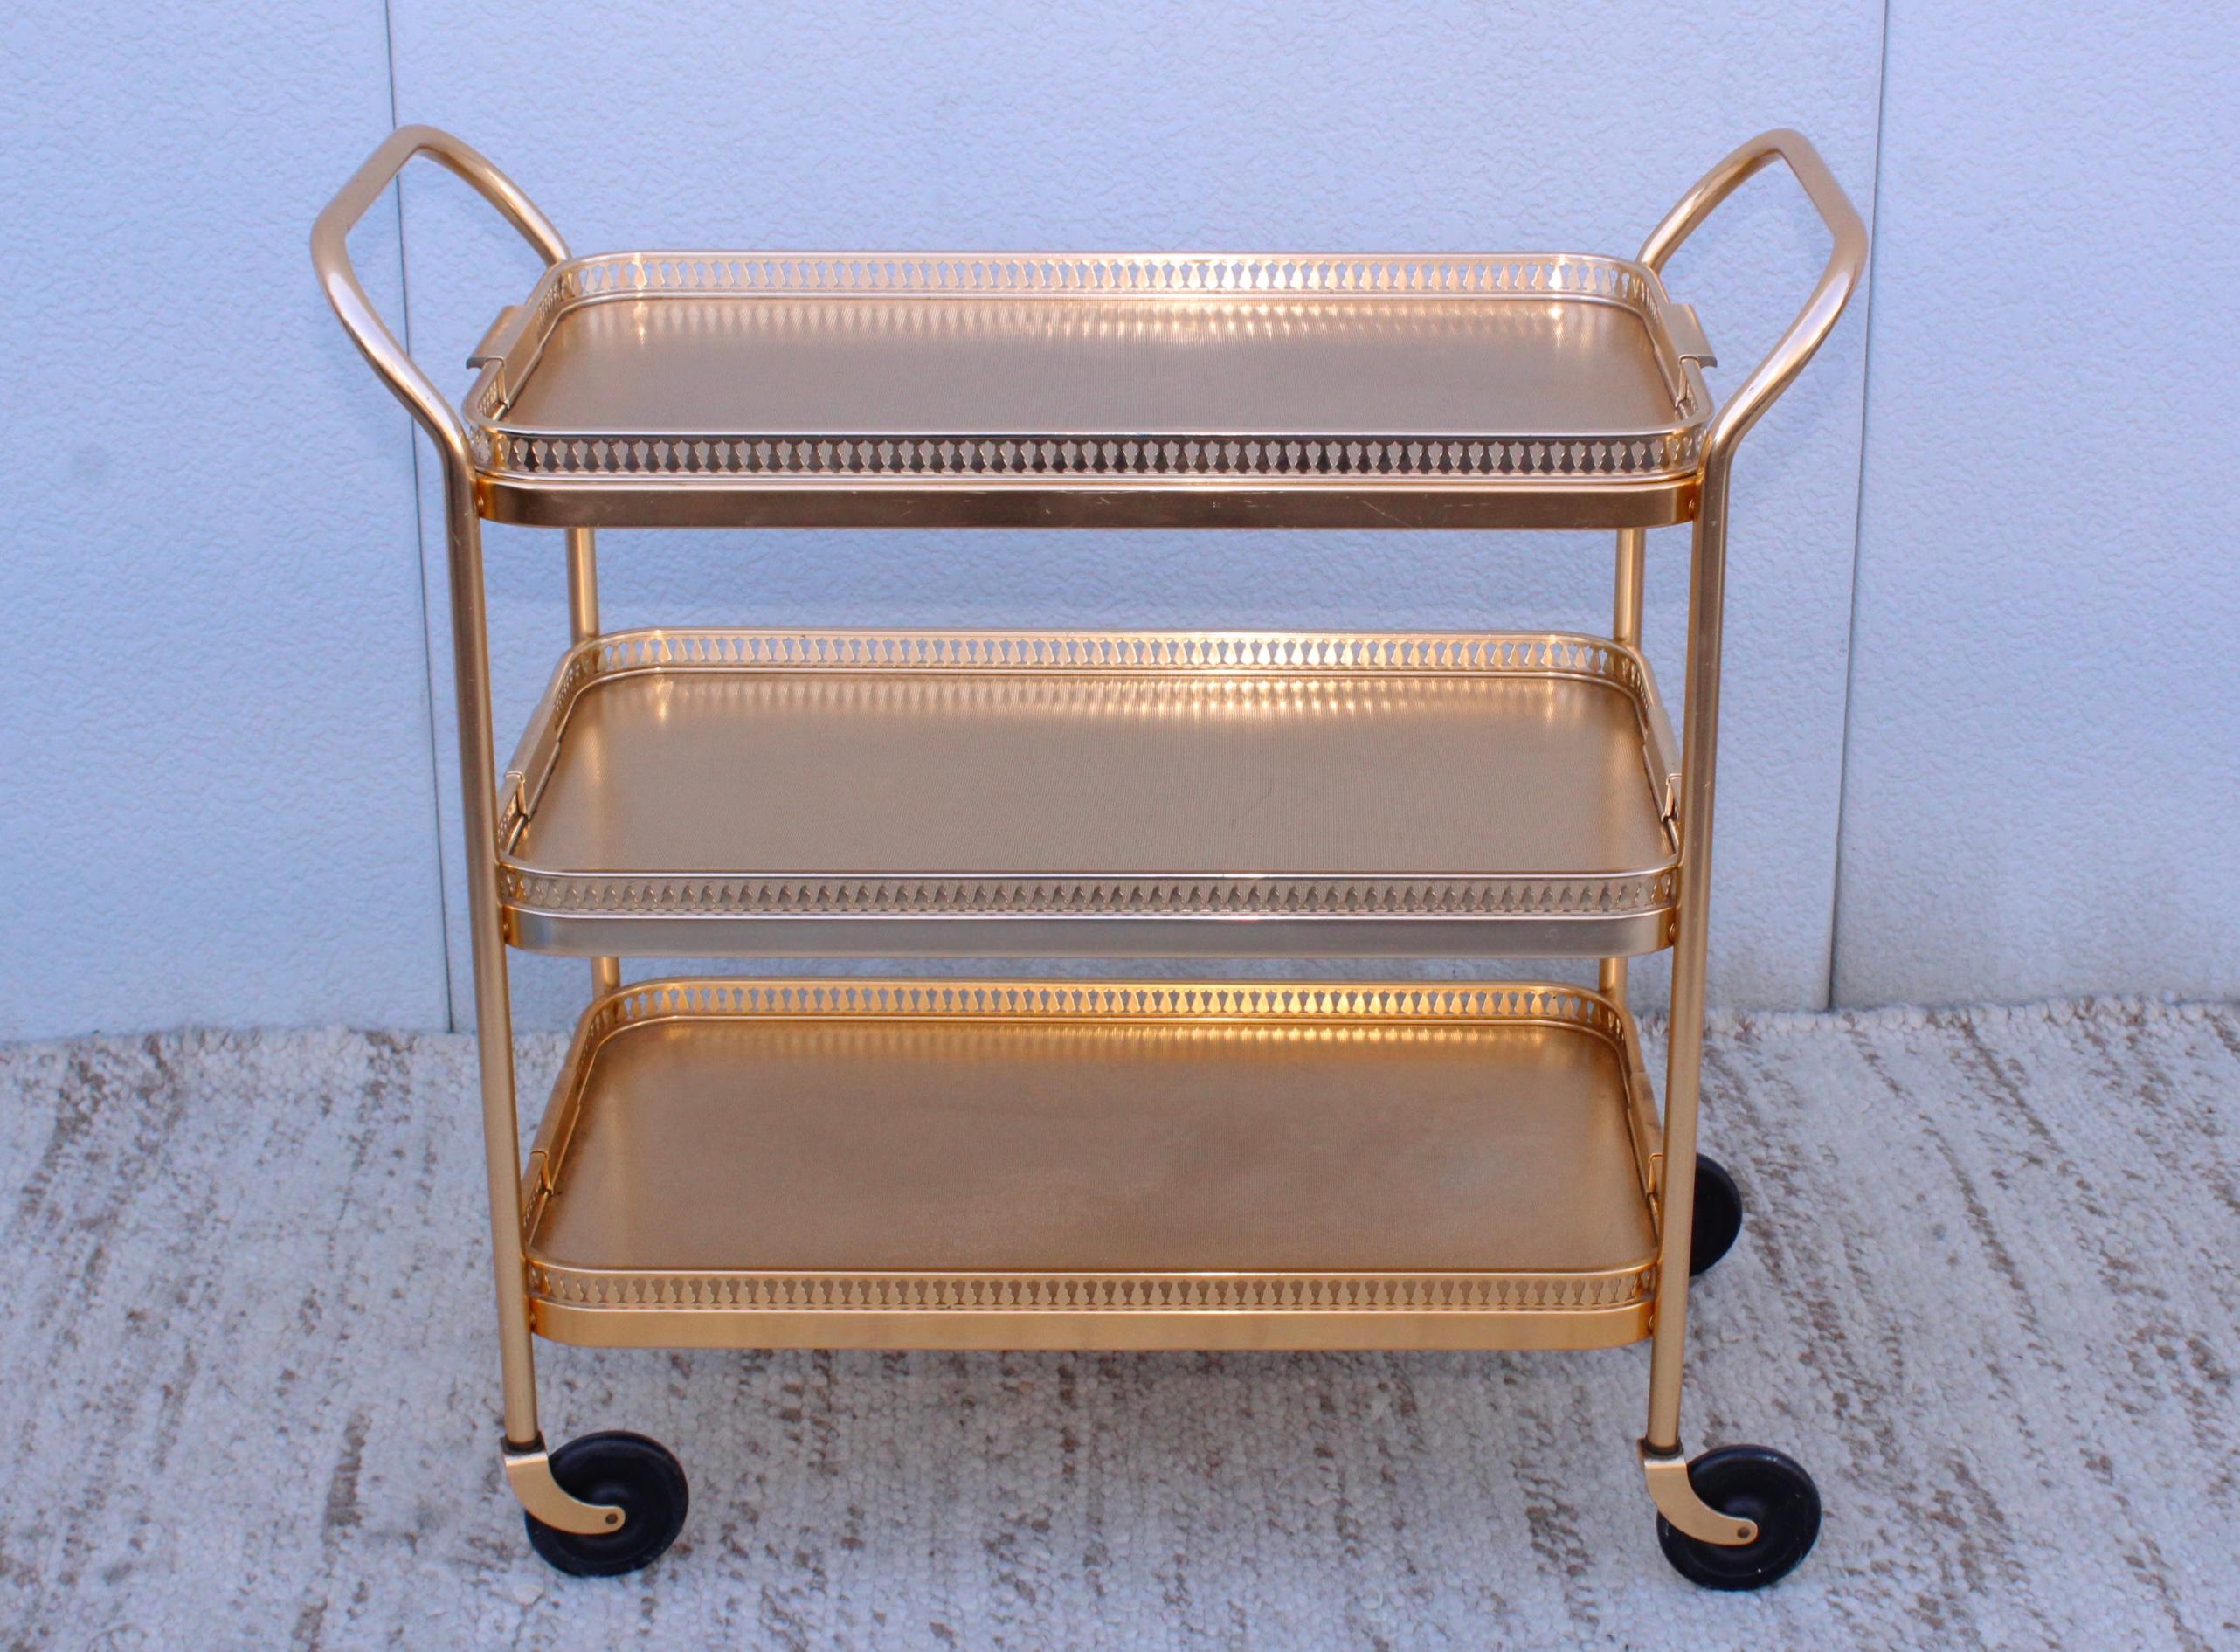 1960's Mid-Century Modern 3 tier bar cart from England made by Kaymet, with removable top tray in vintage original condition with some wear and patina due to age and use.
  